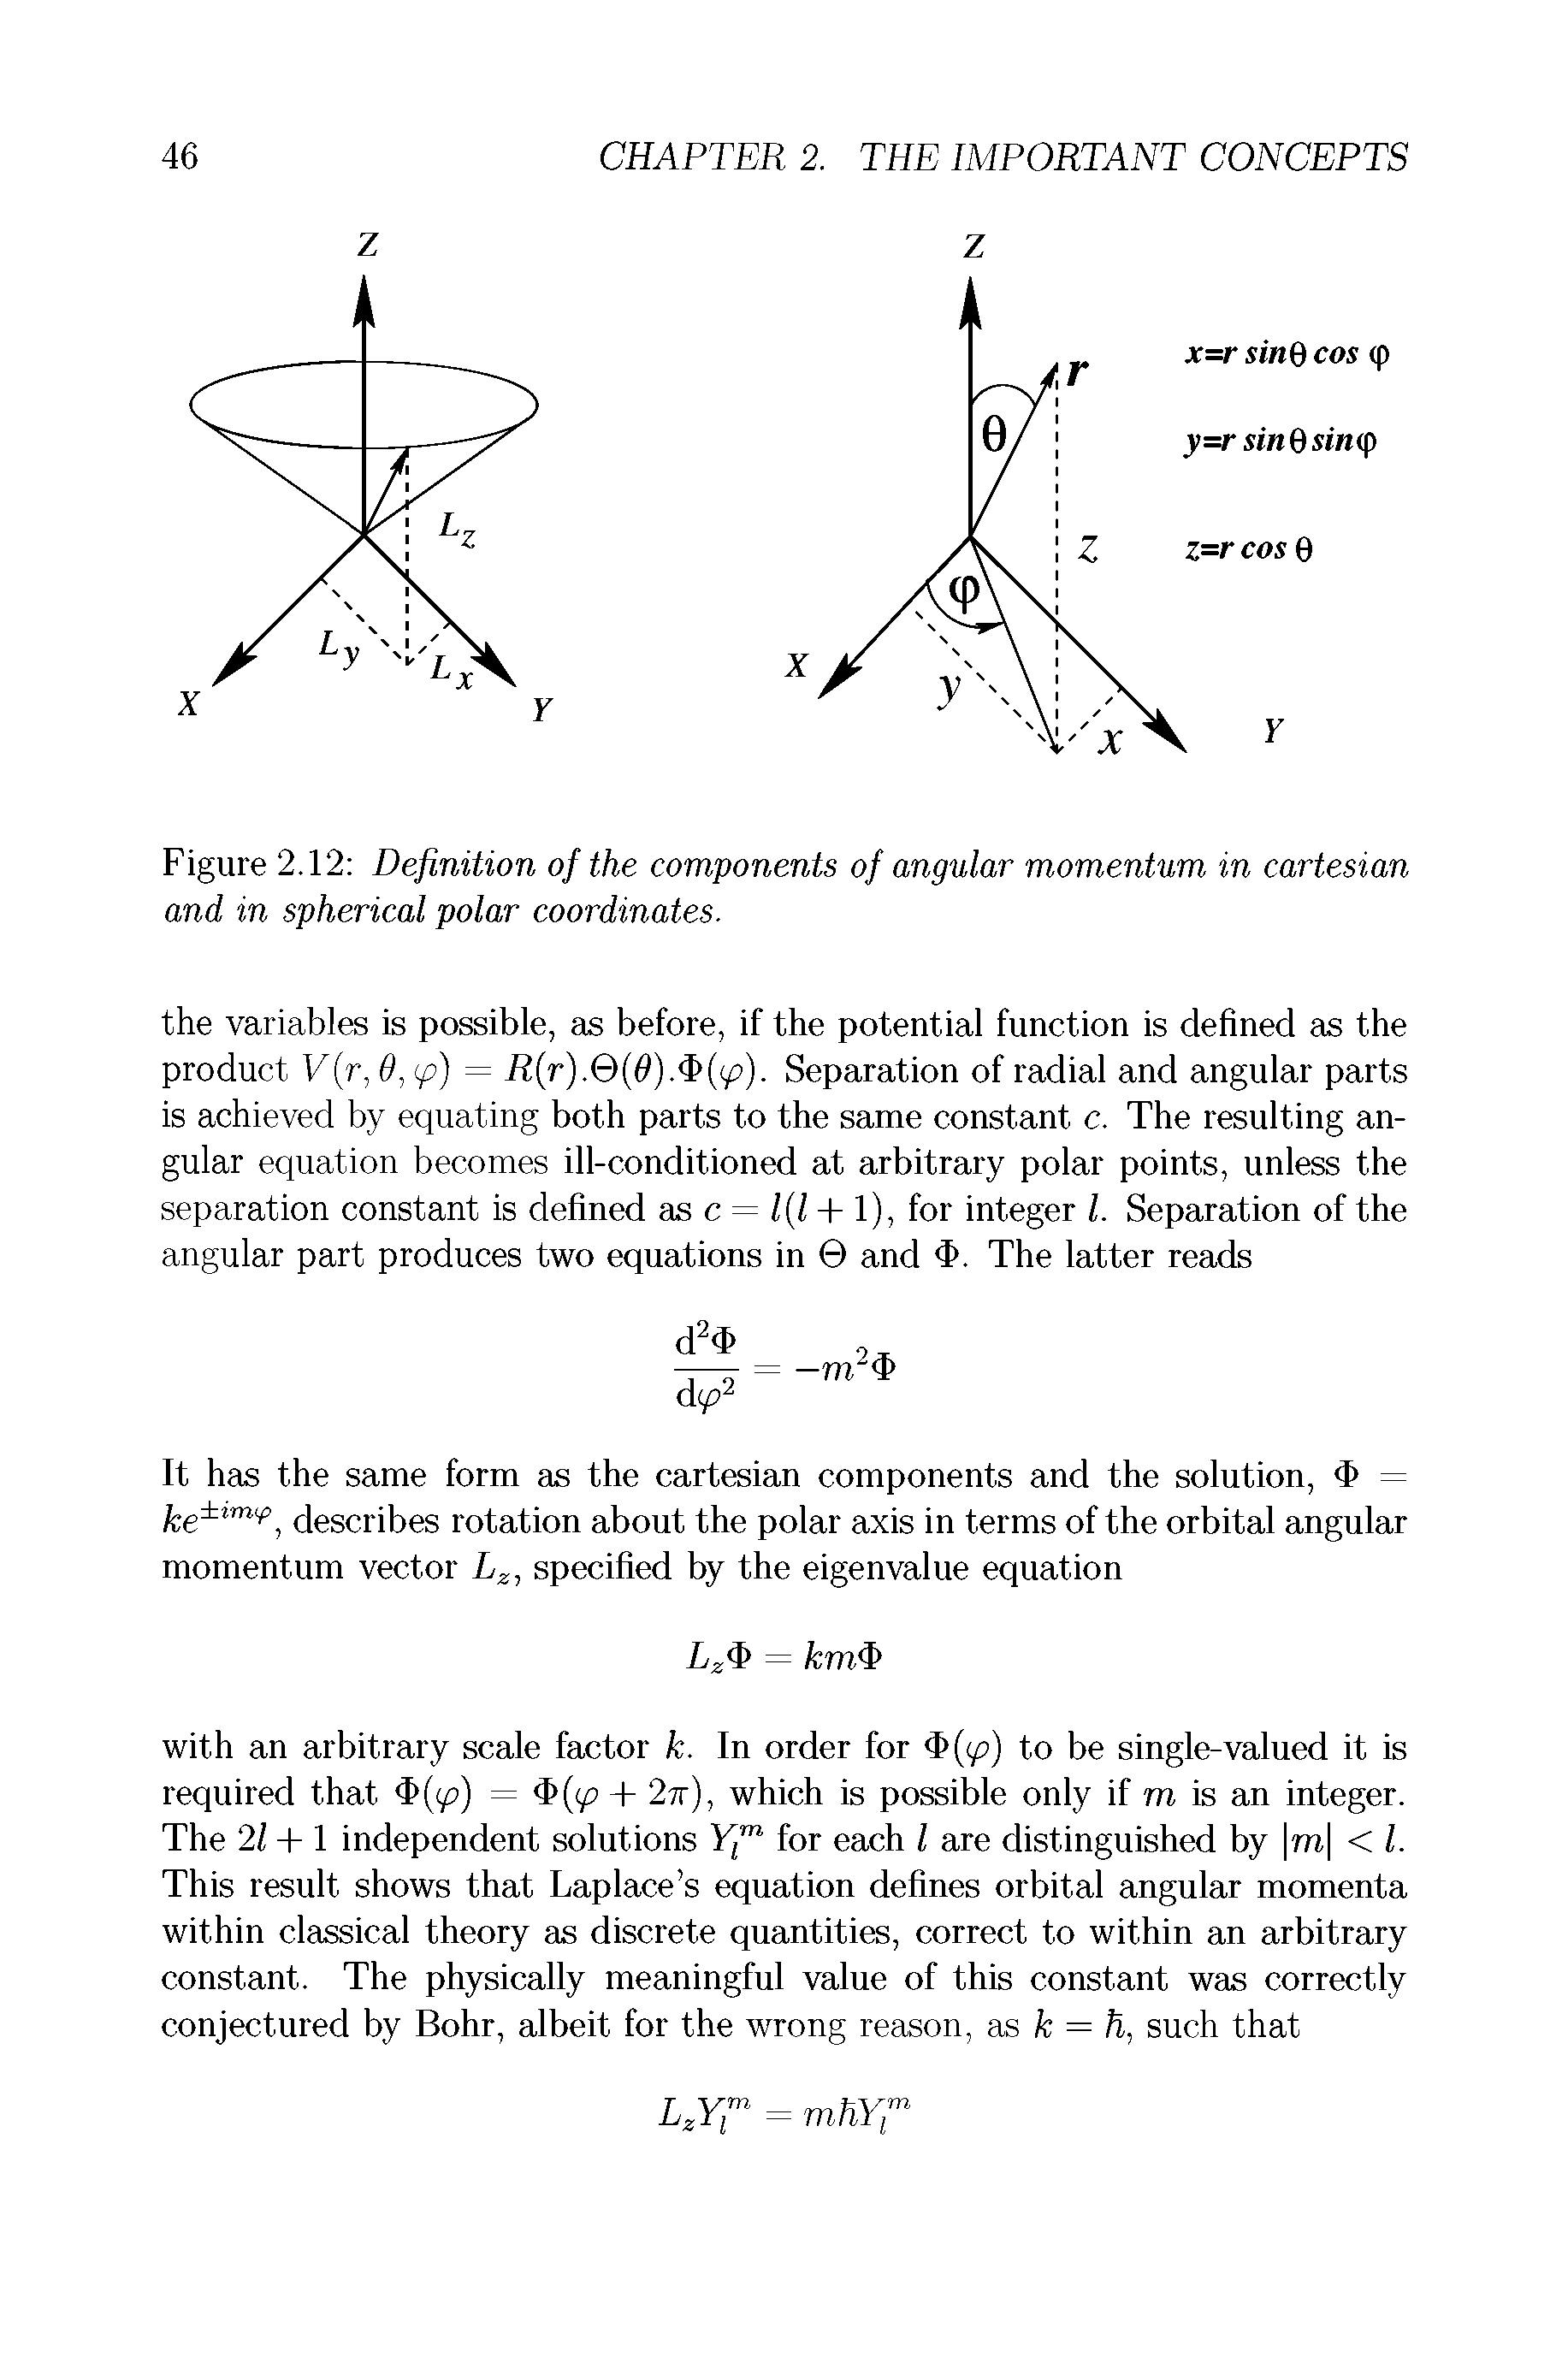 Figure 2.12 Definition of the components of angular momentum in cartesian and in spherical polar coordinates.